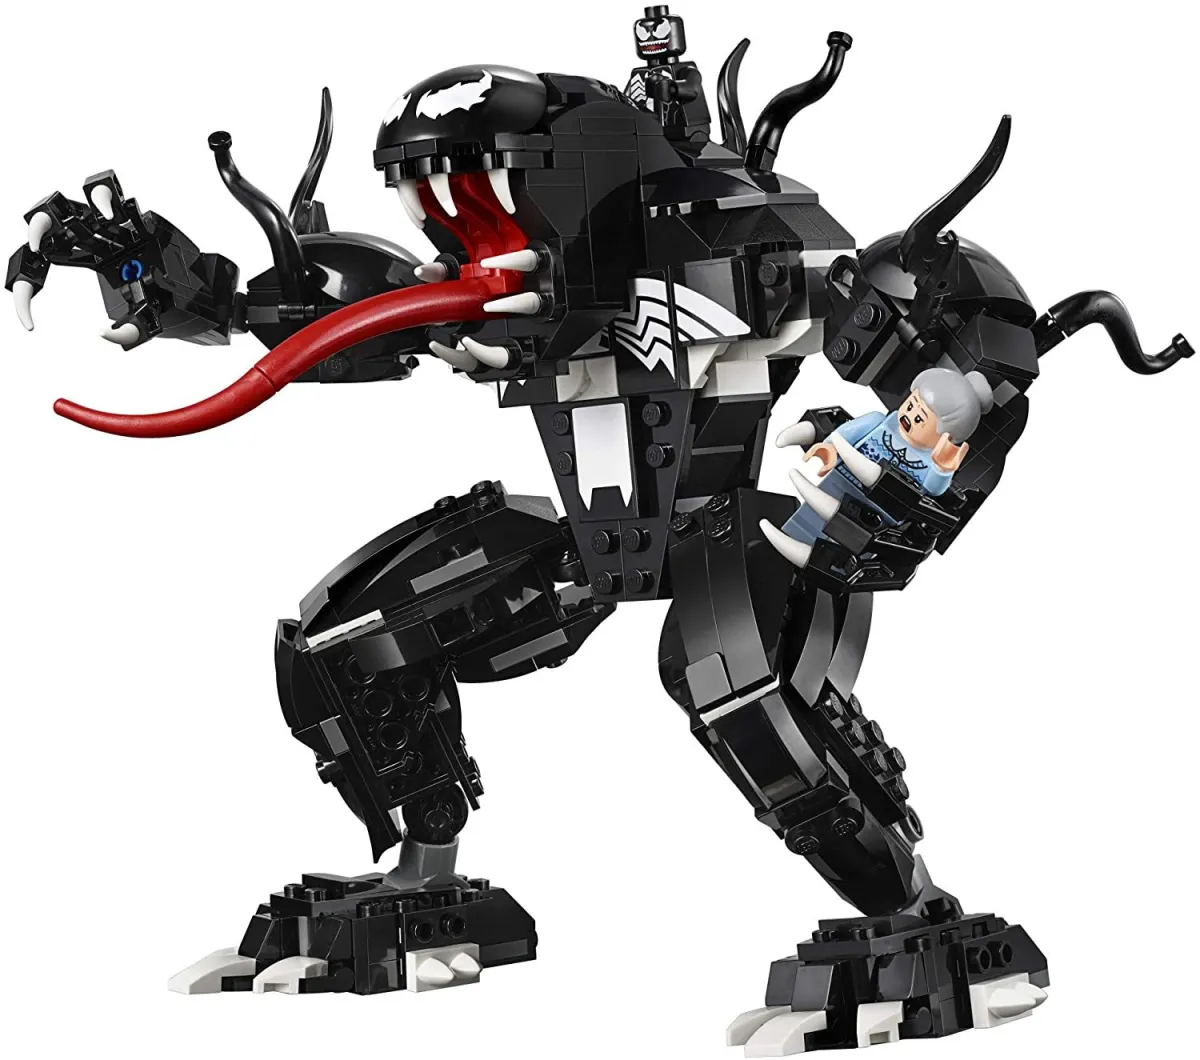 From Denmark】LEGO Marvel Superhero Marvel Spider Mech Action Toy Building  Kit Vs. Venom 76115 and attractive toy claw set, including Spiderman venom  minifigure and ghost spider (604 pieces) guaranteed genuine 